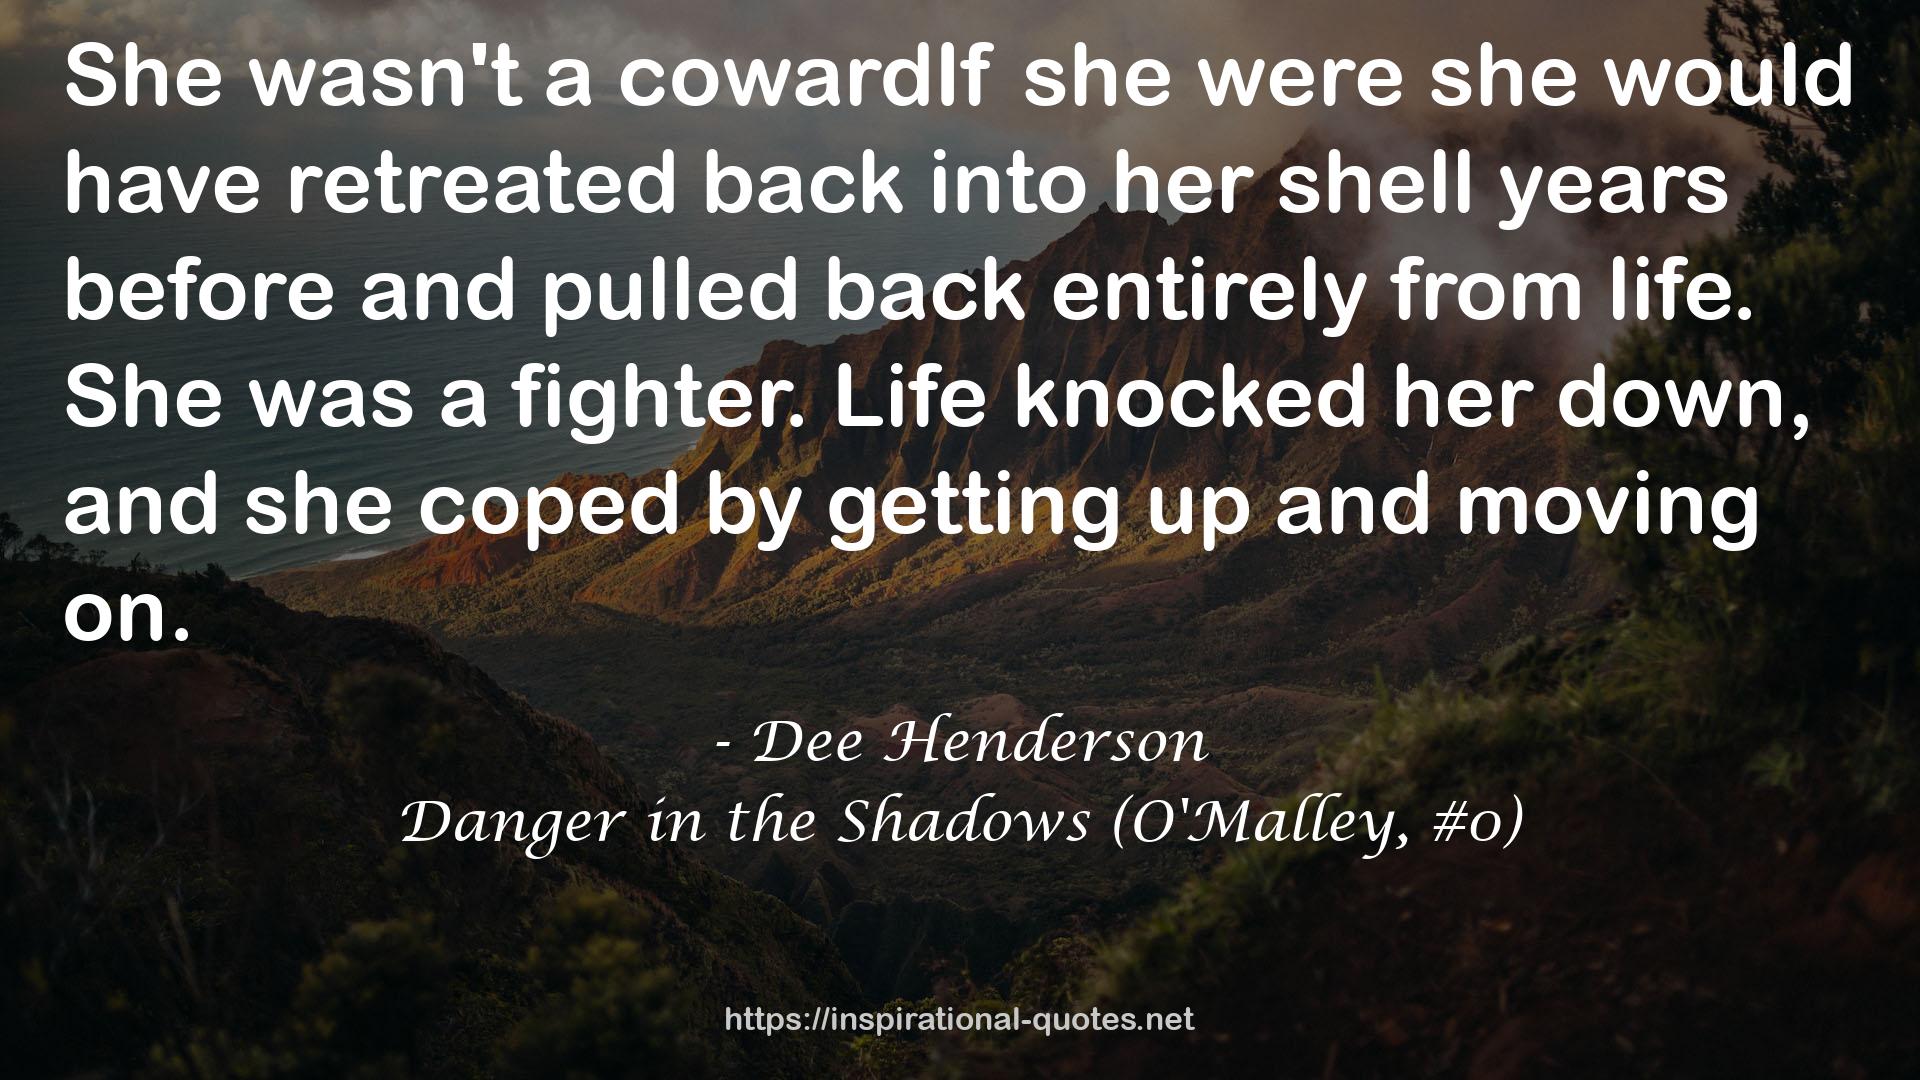 Danger in the Shadows (O'Malley, #0) QUOTES